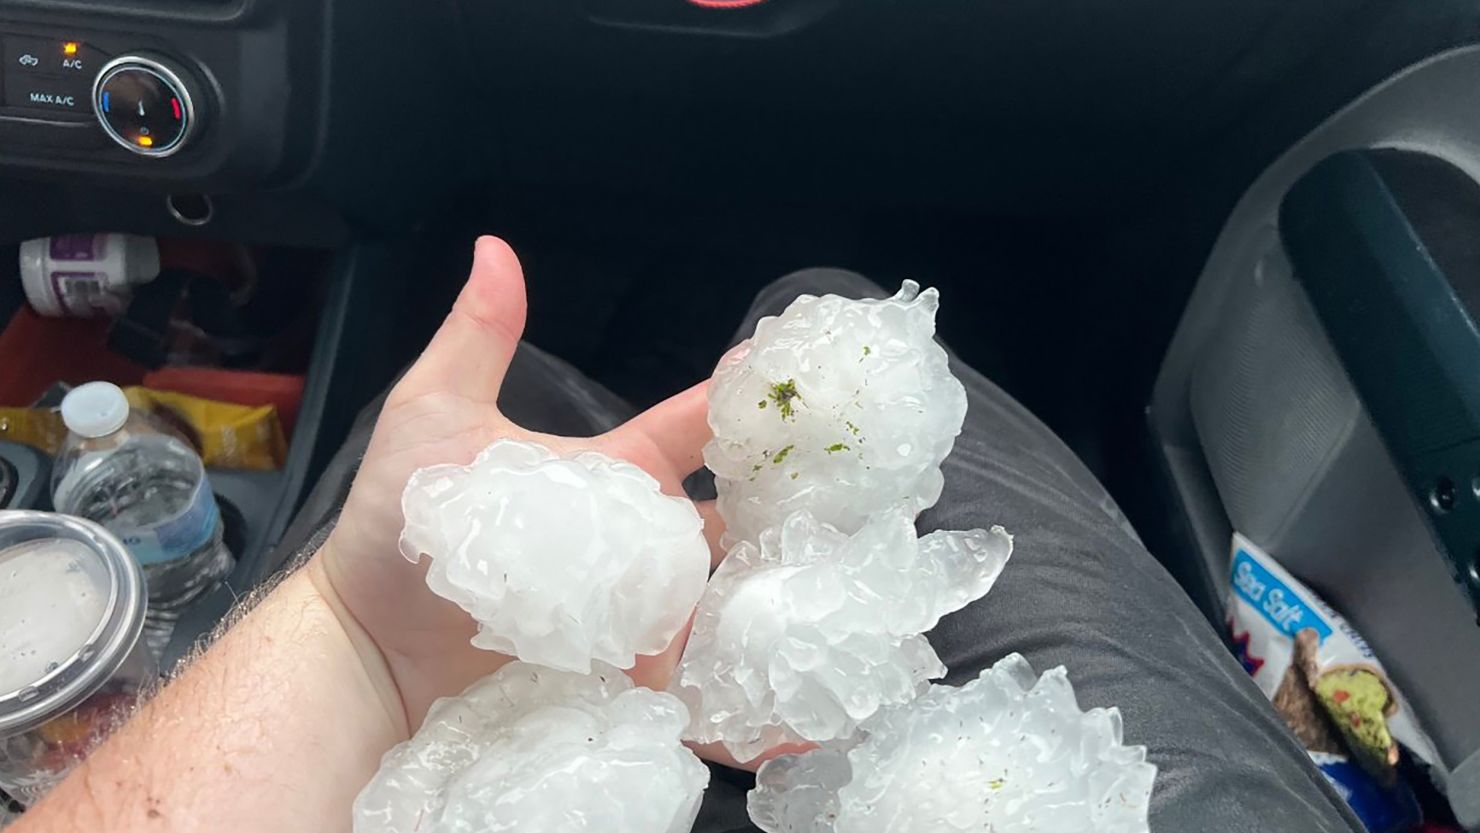 Storm chaser Matthew Waters was 2 miles east of Waco, Texss, when he took photos of hail measuring nearly 4 inches long.